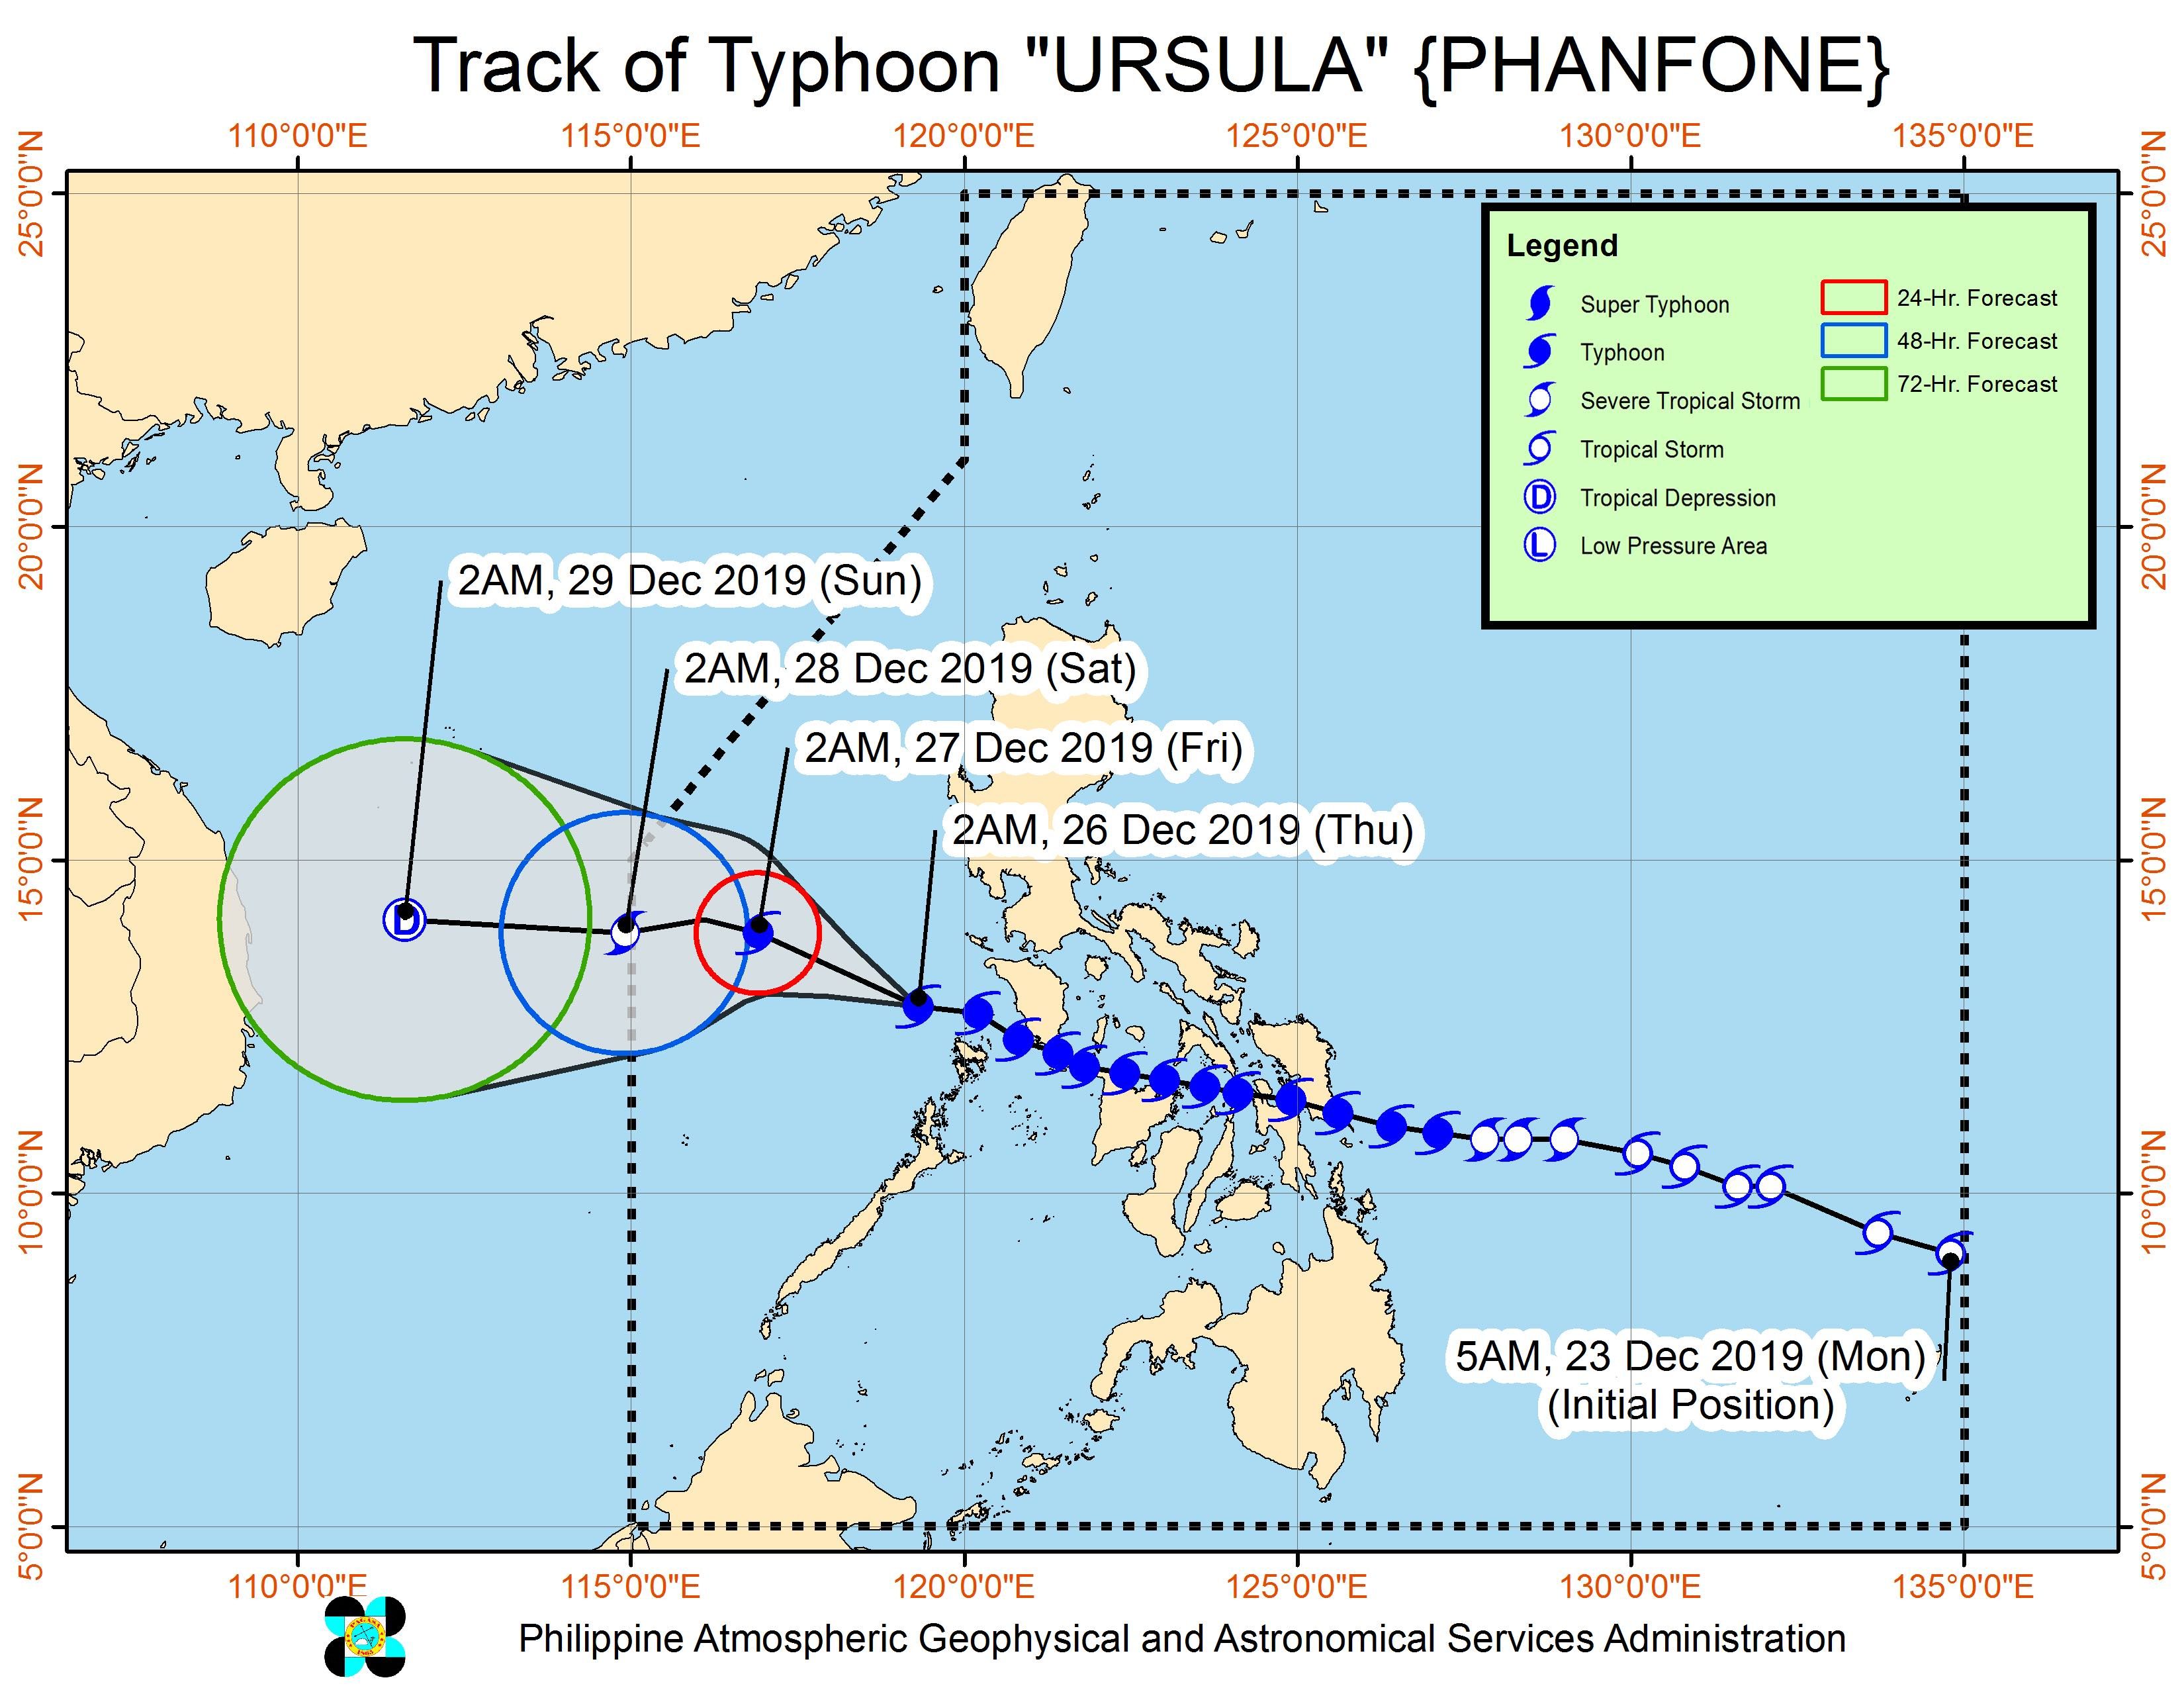 Forecast track of Typhoon Ursula (Phanfone) as of December 26, 2019, 5 am. Image from PAGASA 